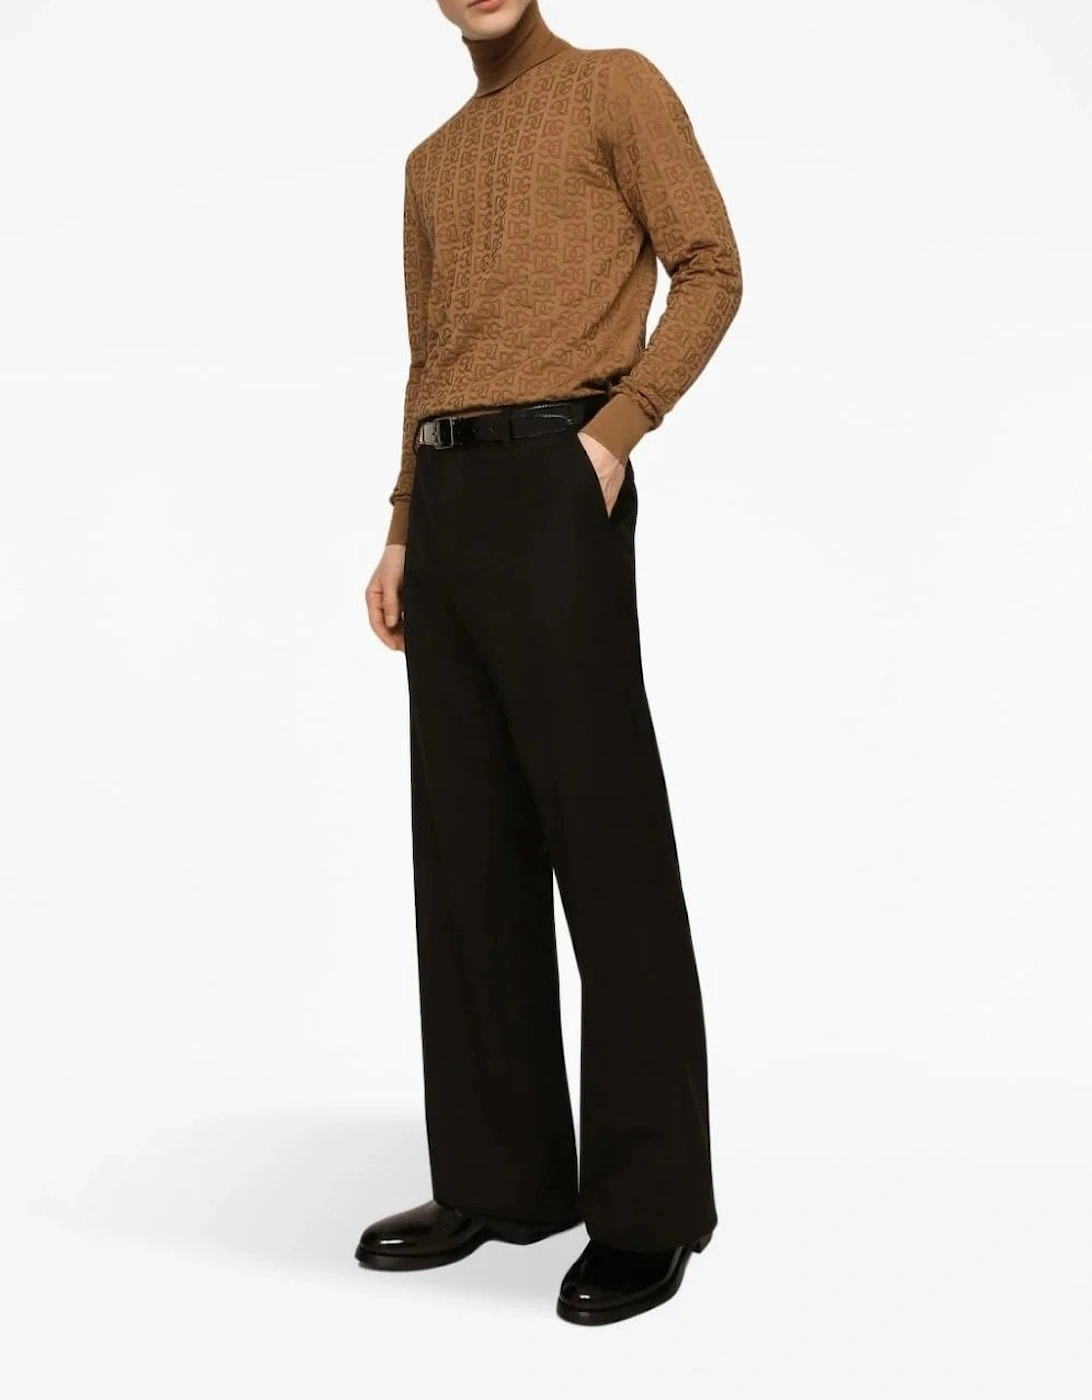 Woven Roll Neck Sweater Camel Brown